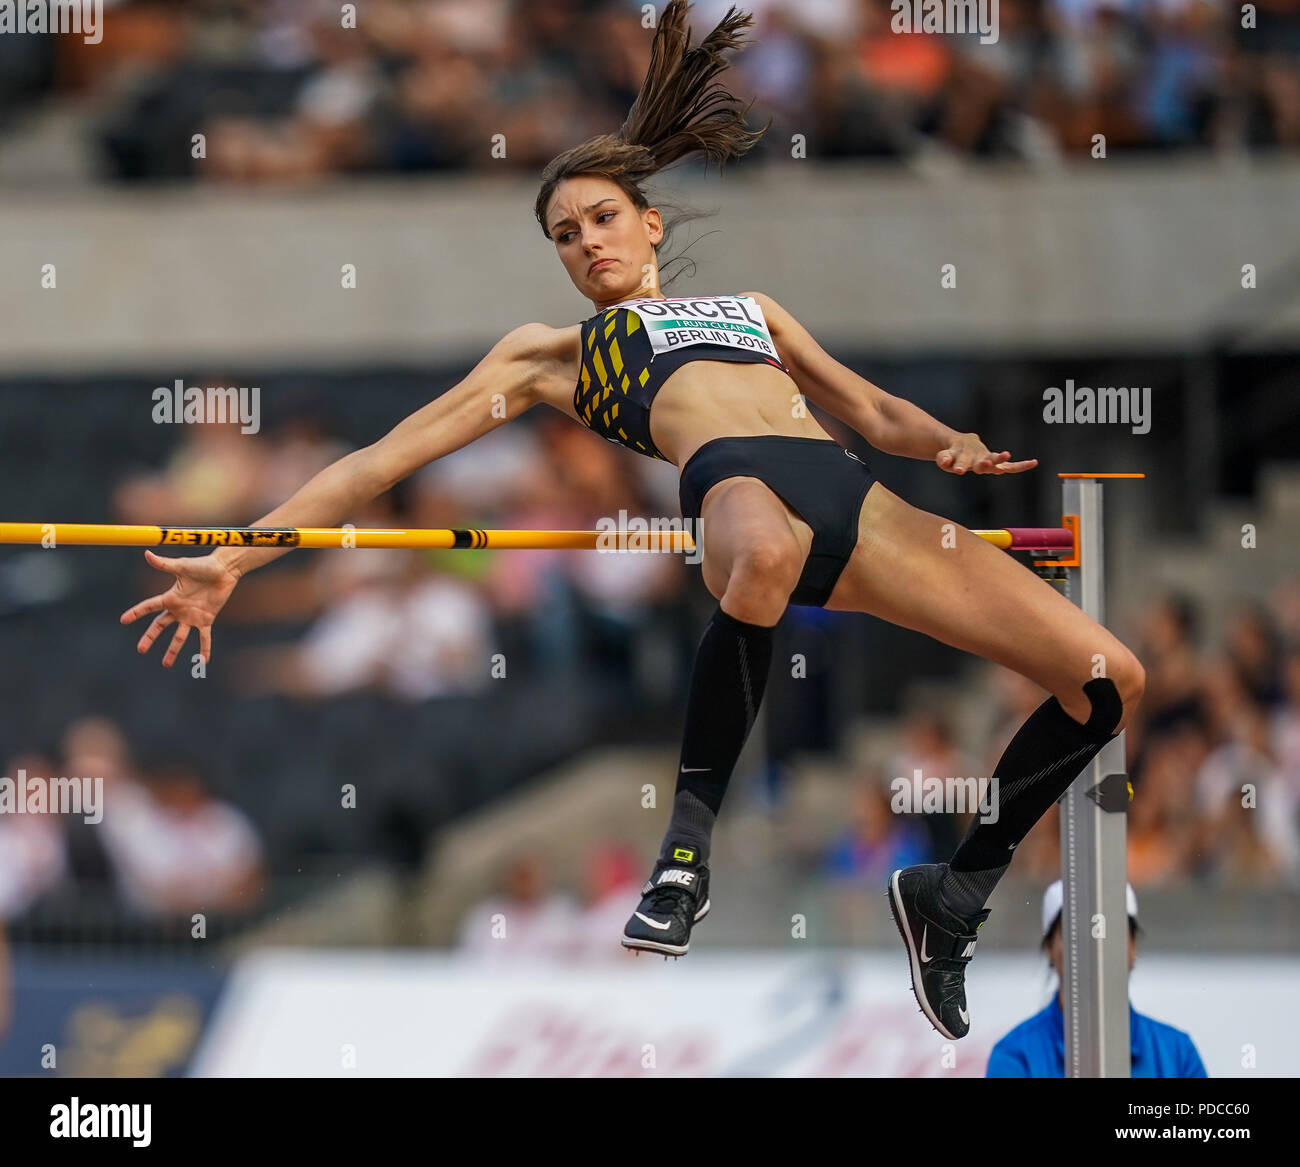 Berlin, Germany. August 8, 2018: Claire Orcel of Belgium during High jump qualification for women at the Olympic Stadium in Berlin at the European Athletics Championship. Ulrik Pedersen/CSM Credit: Cal Sport Media/Alamy Live News Stock Photo